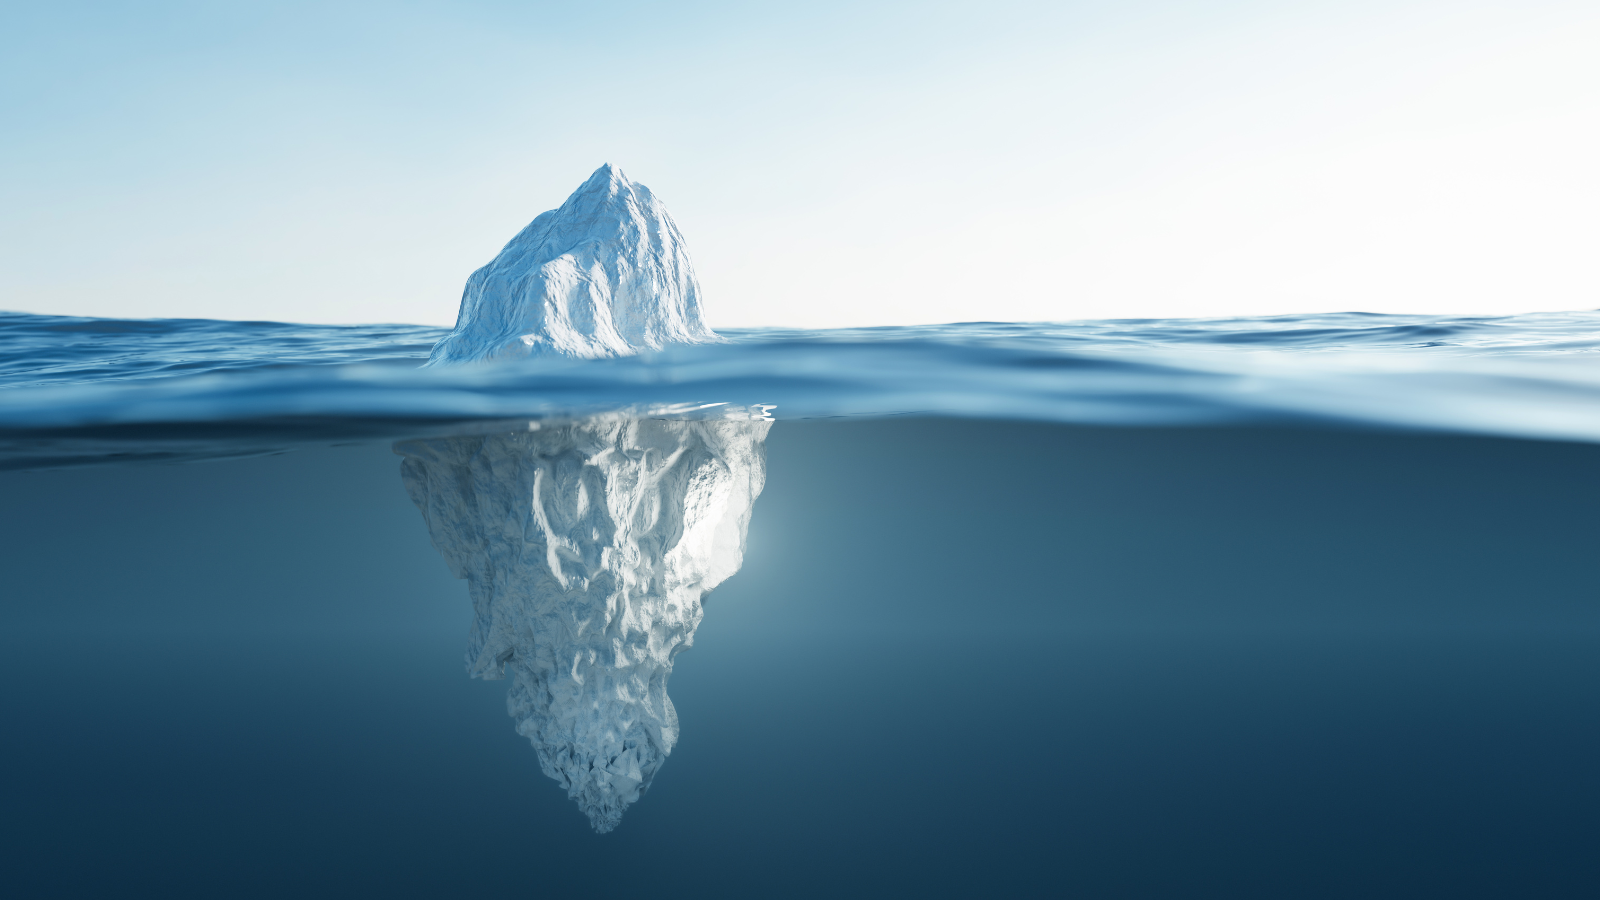 Those Leads You’re Getting? They May Be Only the Tip of Your Iceberg